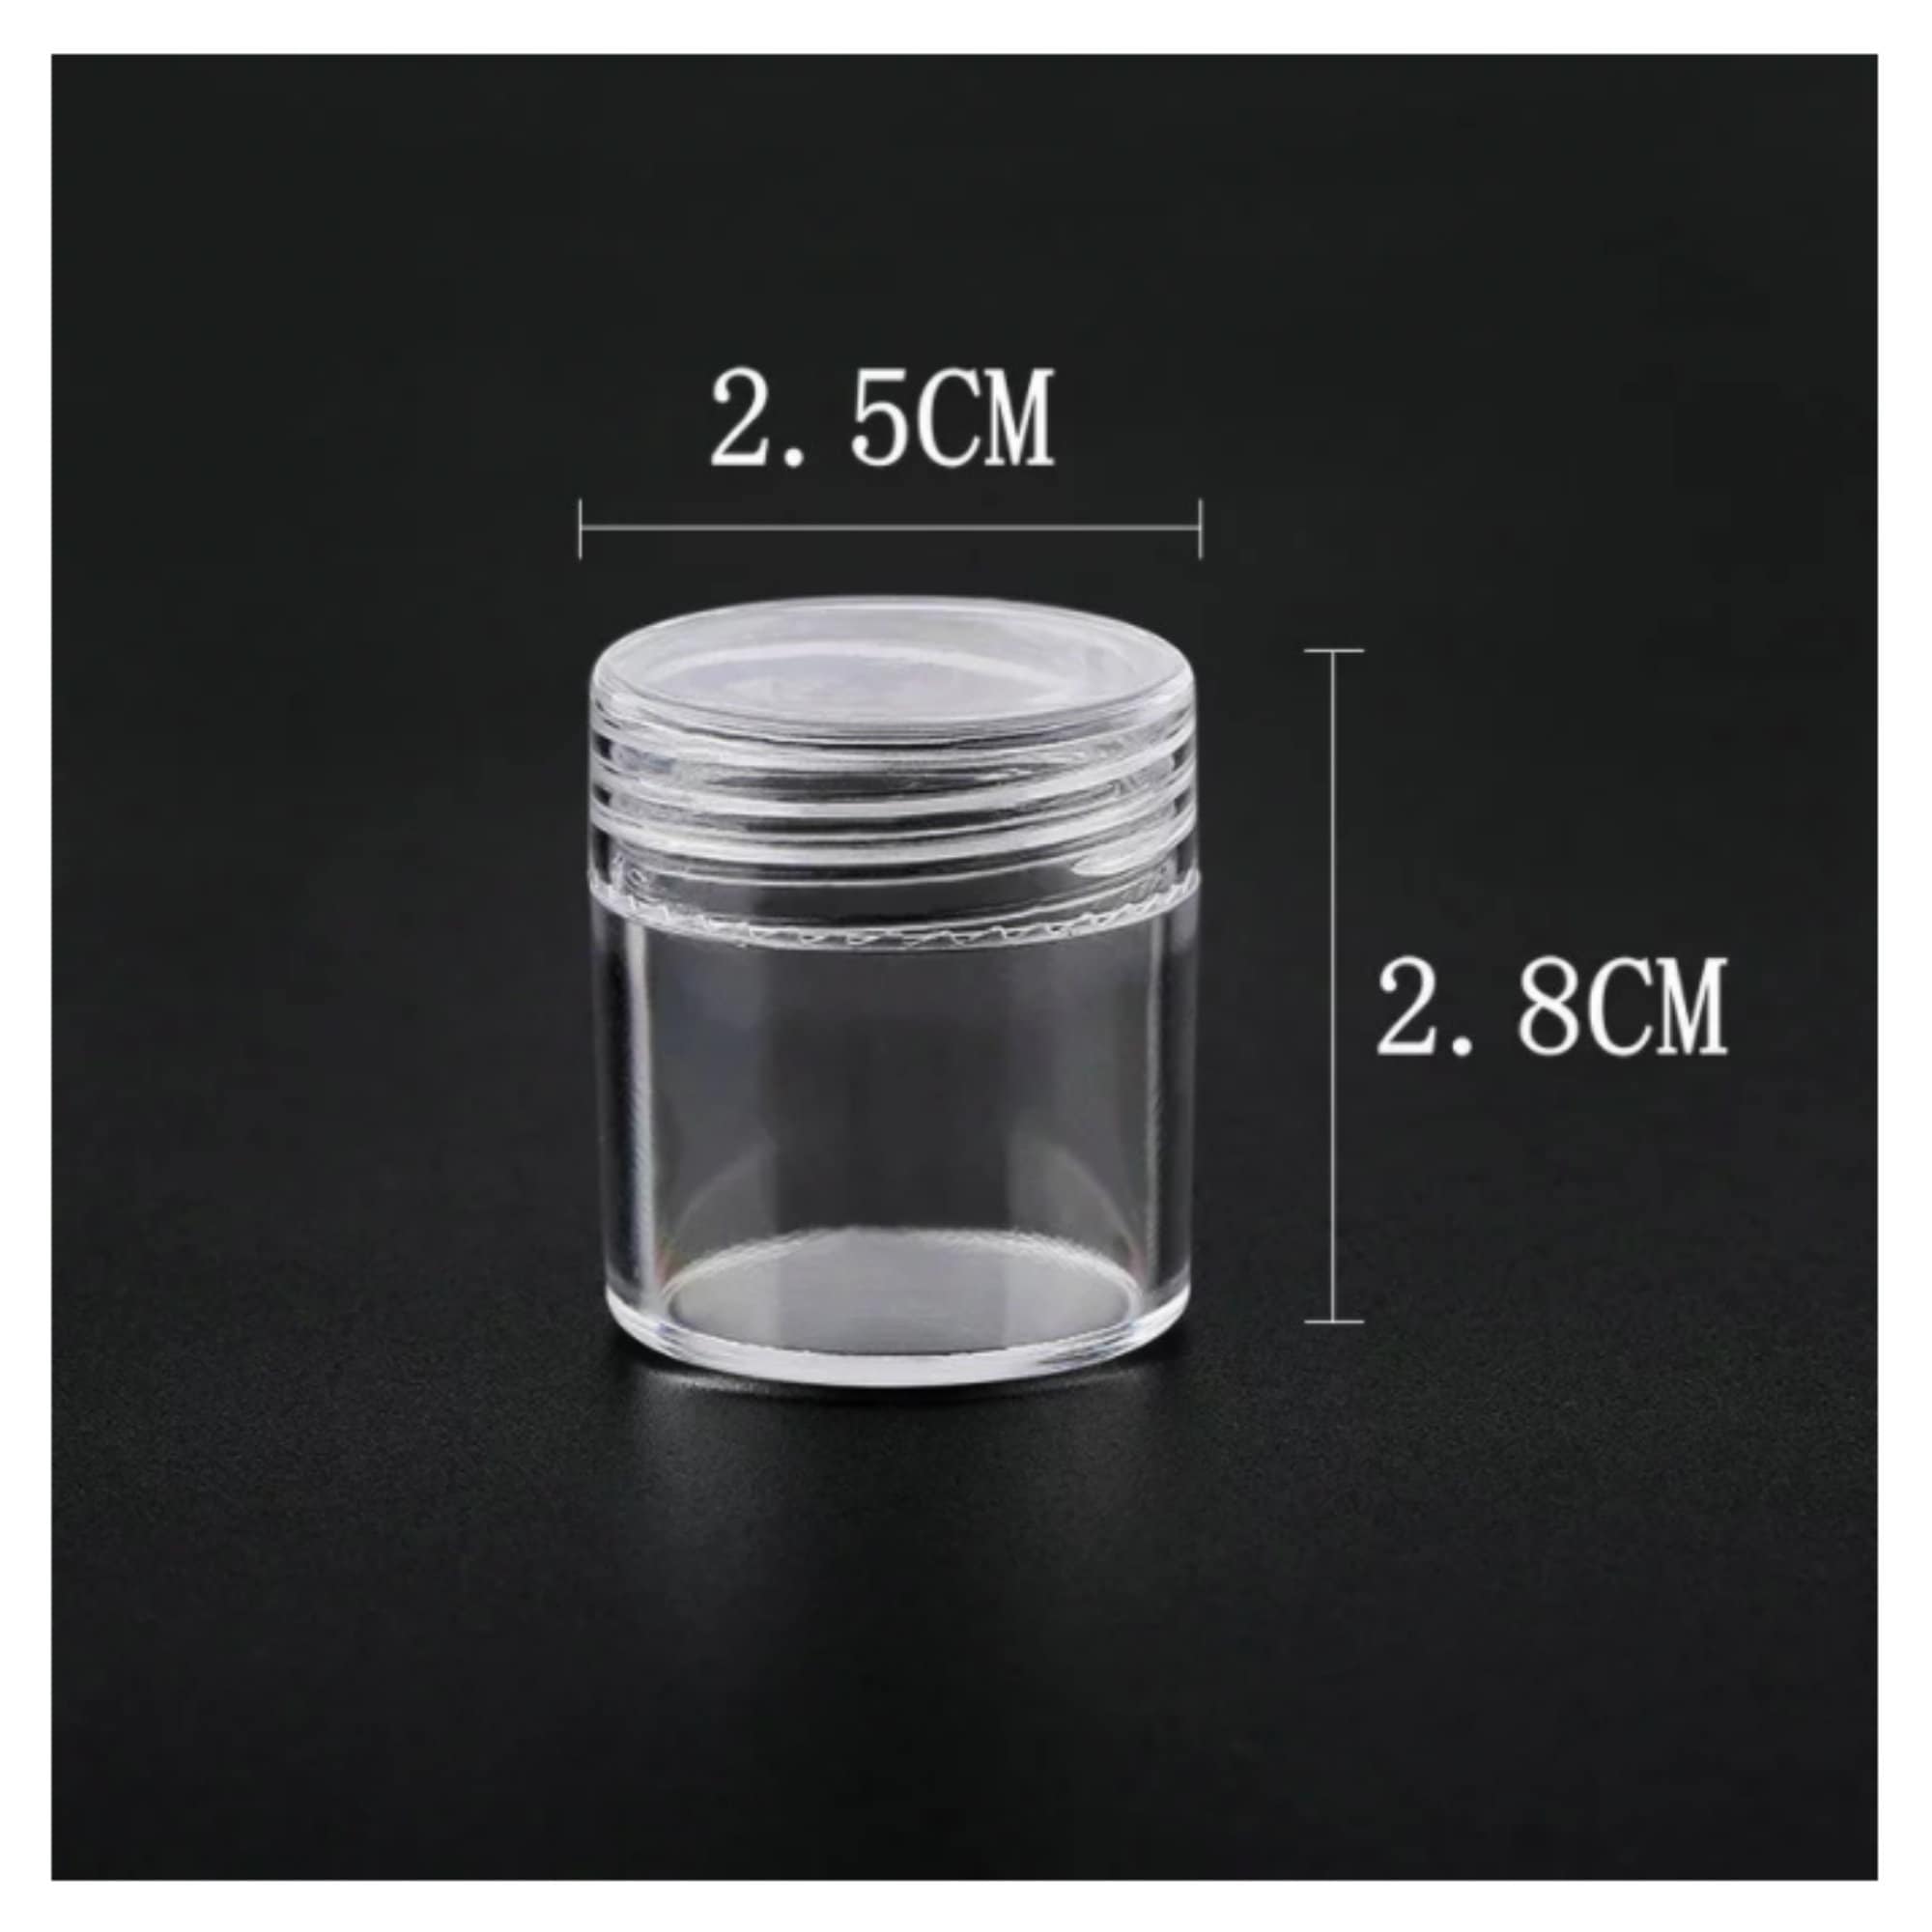 Frogued 12Pcs Clear Slime Storage Round Plastic Box Container Foam Ball  Cups with Lids (Clear)